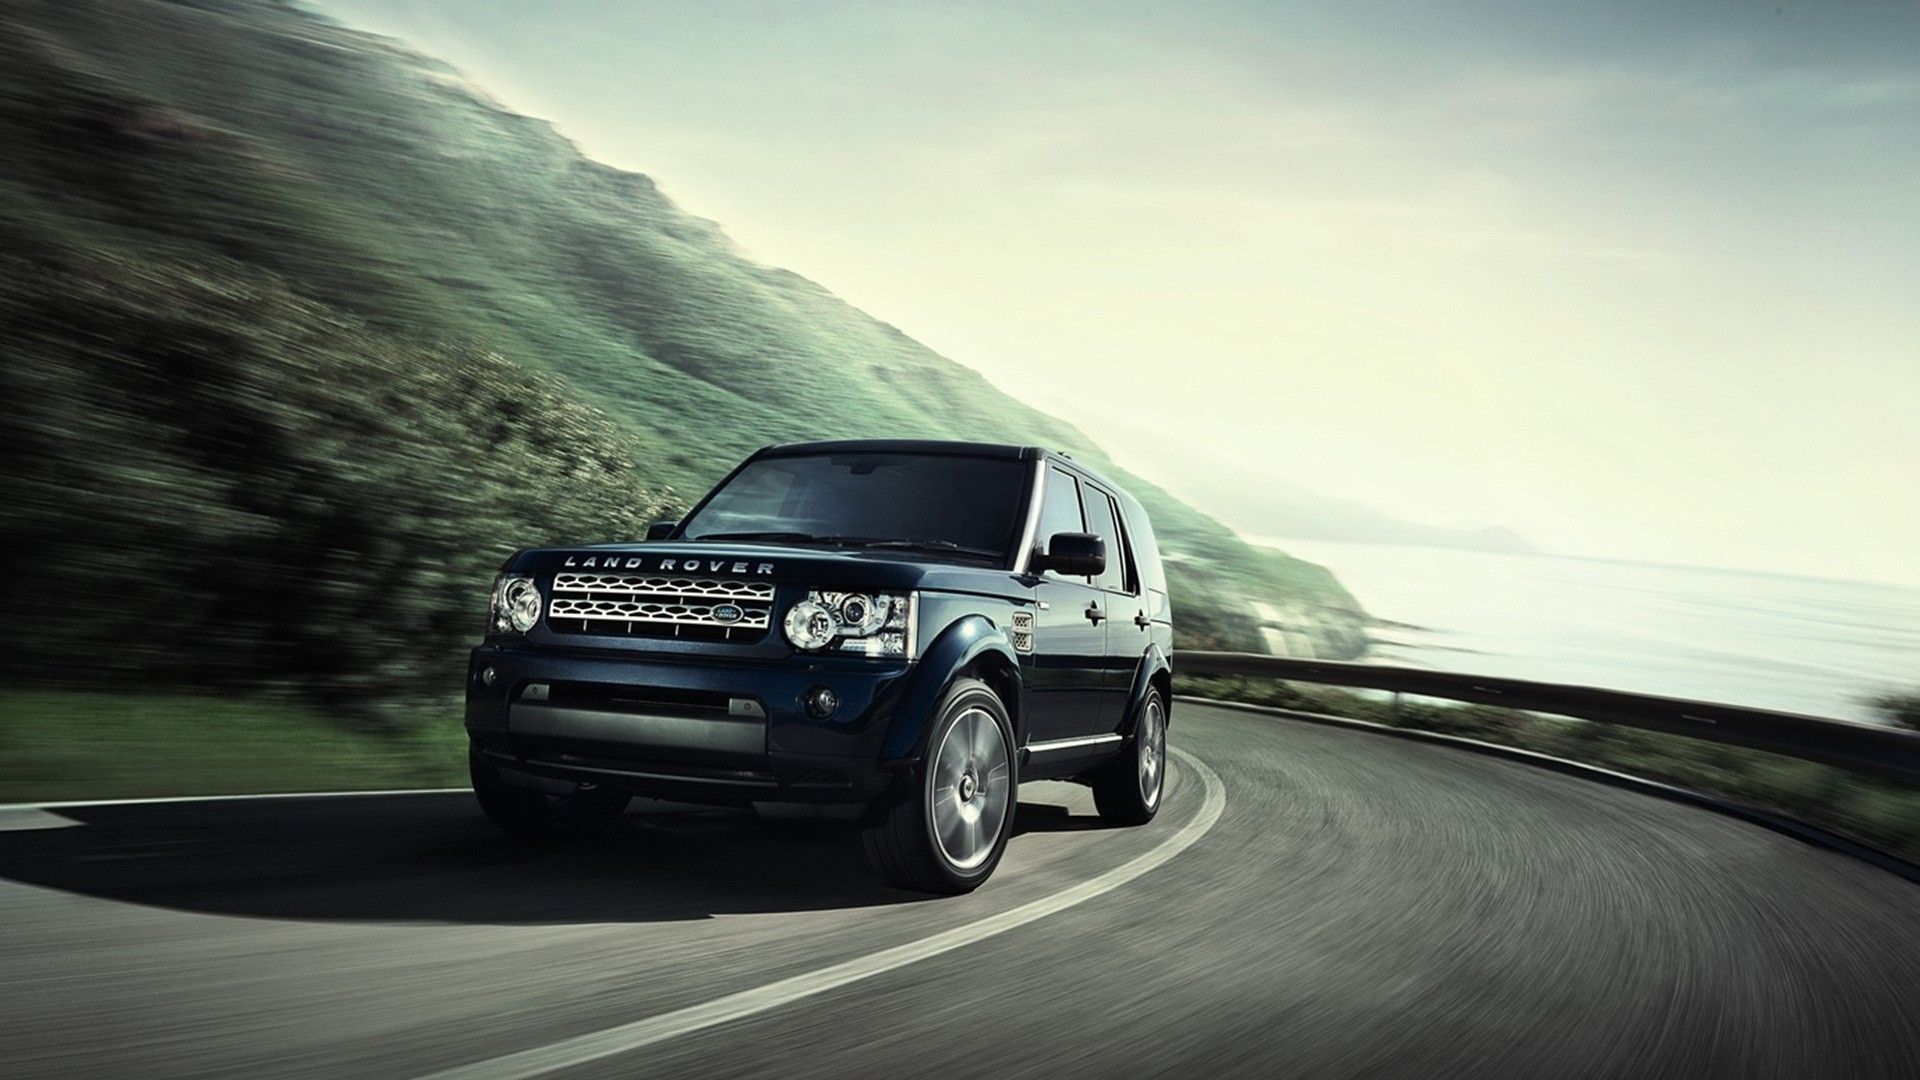 1920x1080 Land Rover Discovery 4 desktop PC and Mac wallpaper